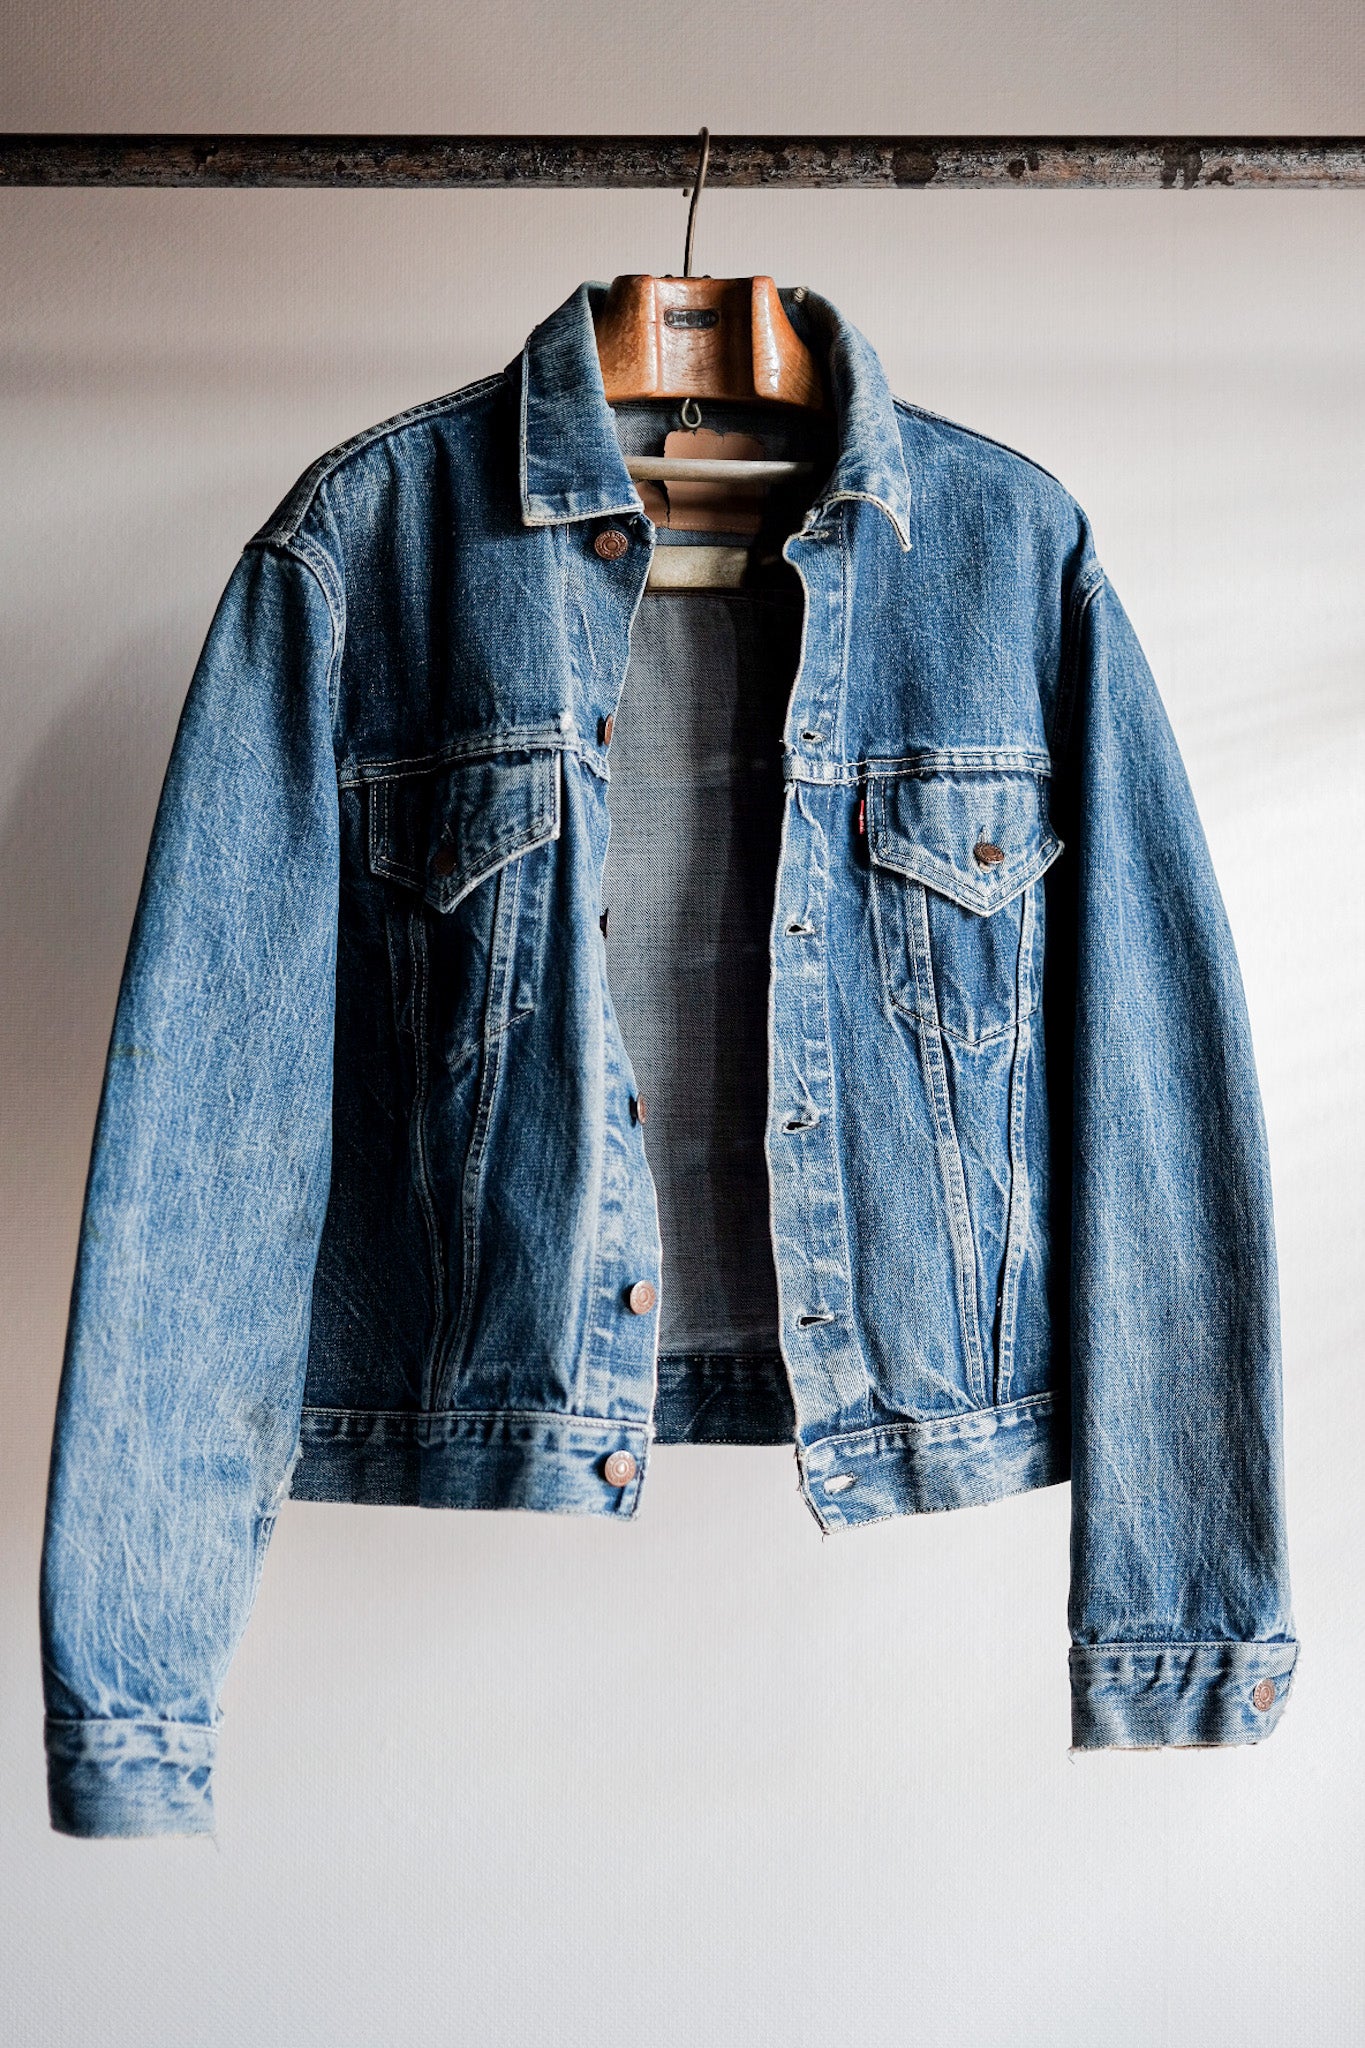 Classic Levi's Jackets Make a Fashion Statement for the Ages | Art & Object